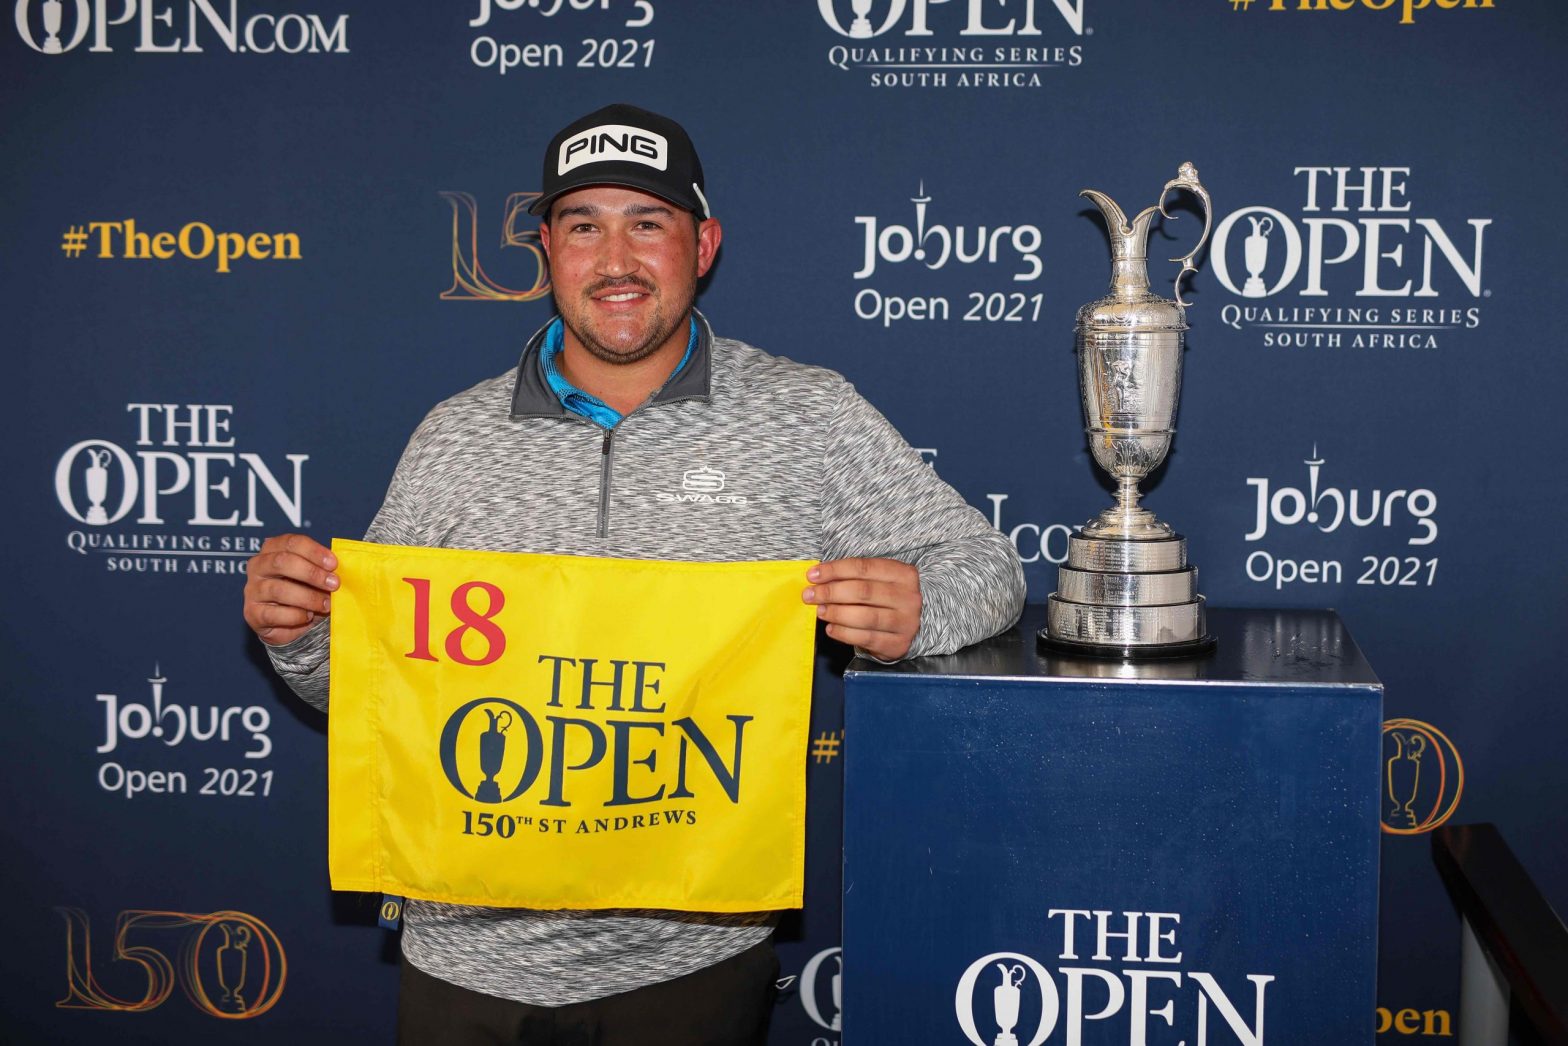 Lawrence wins Joburg Open and books his ticket to St Andrews 1